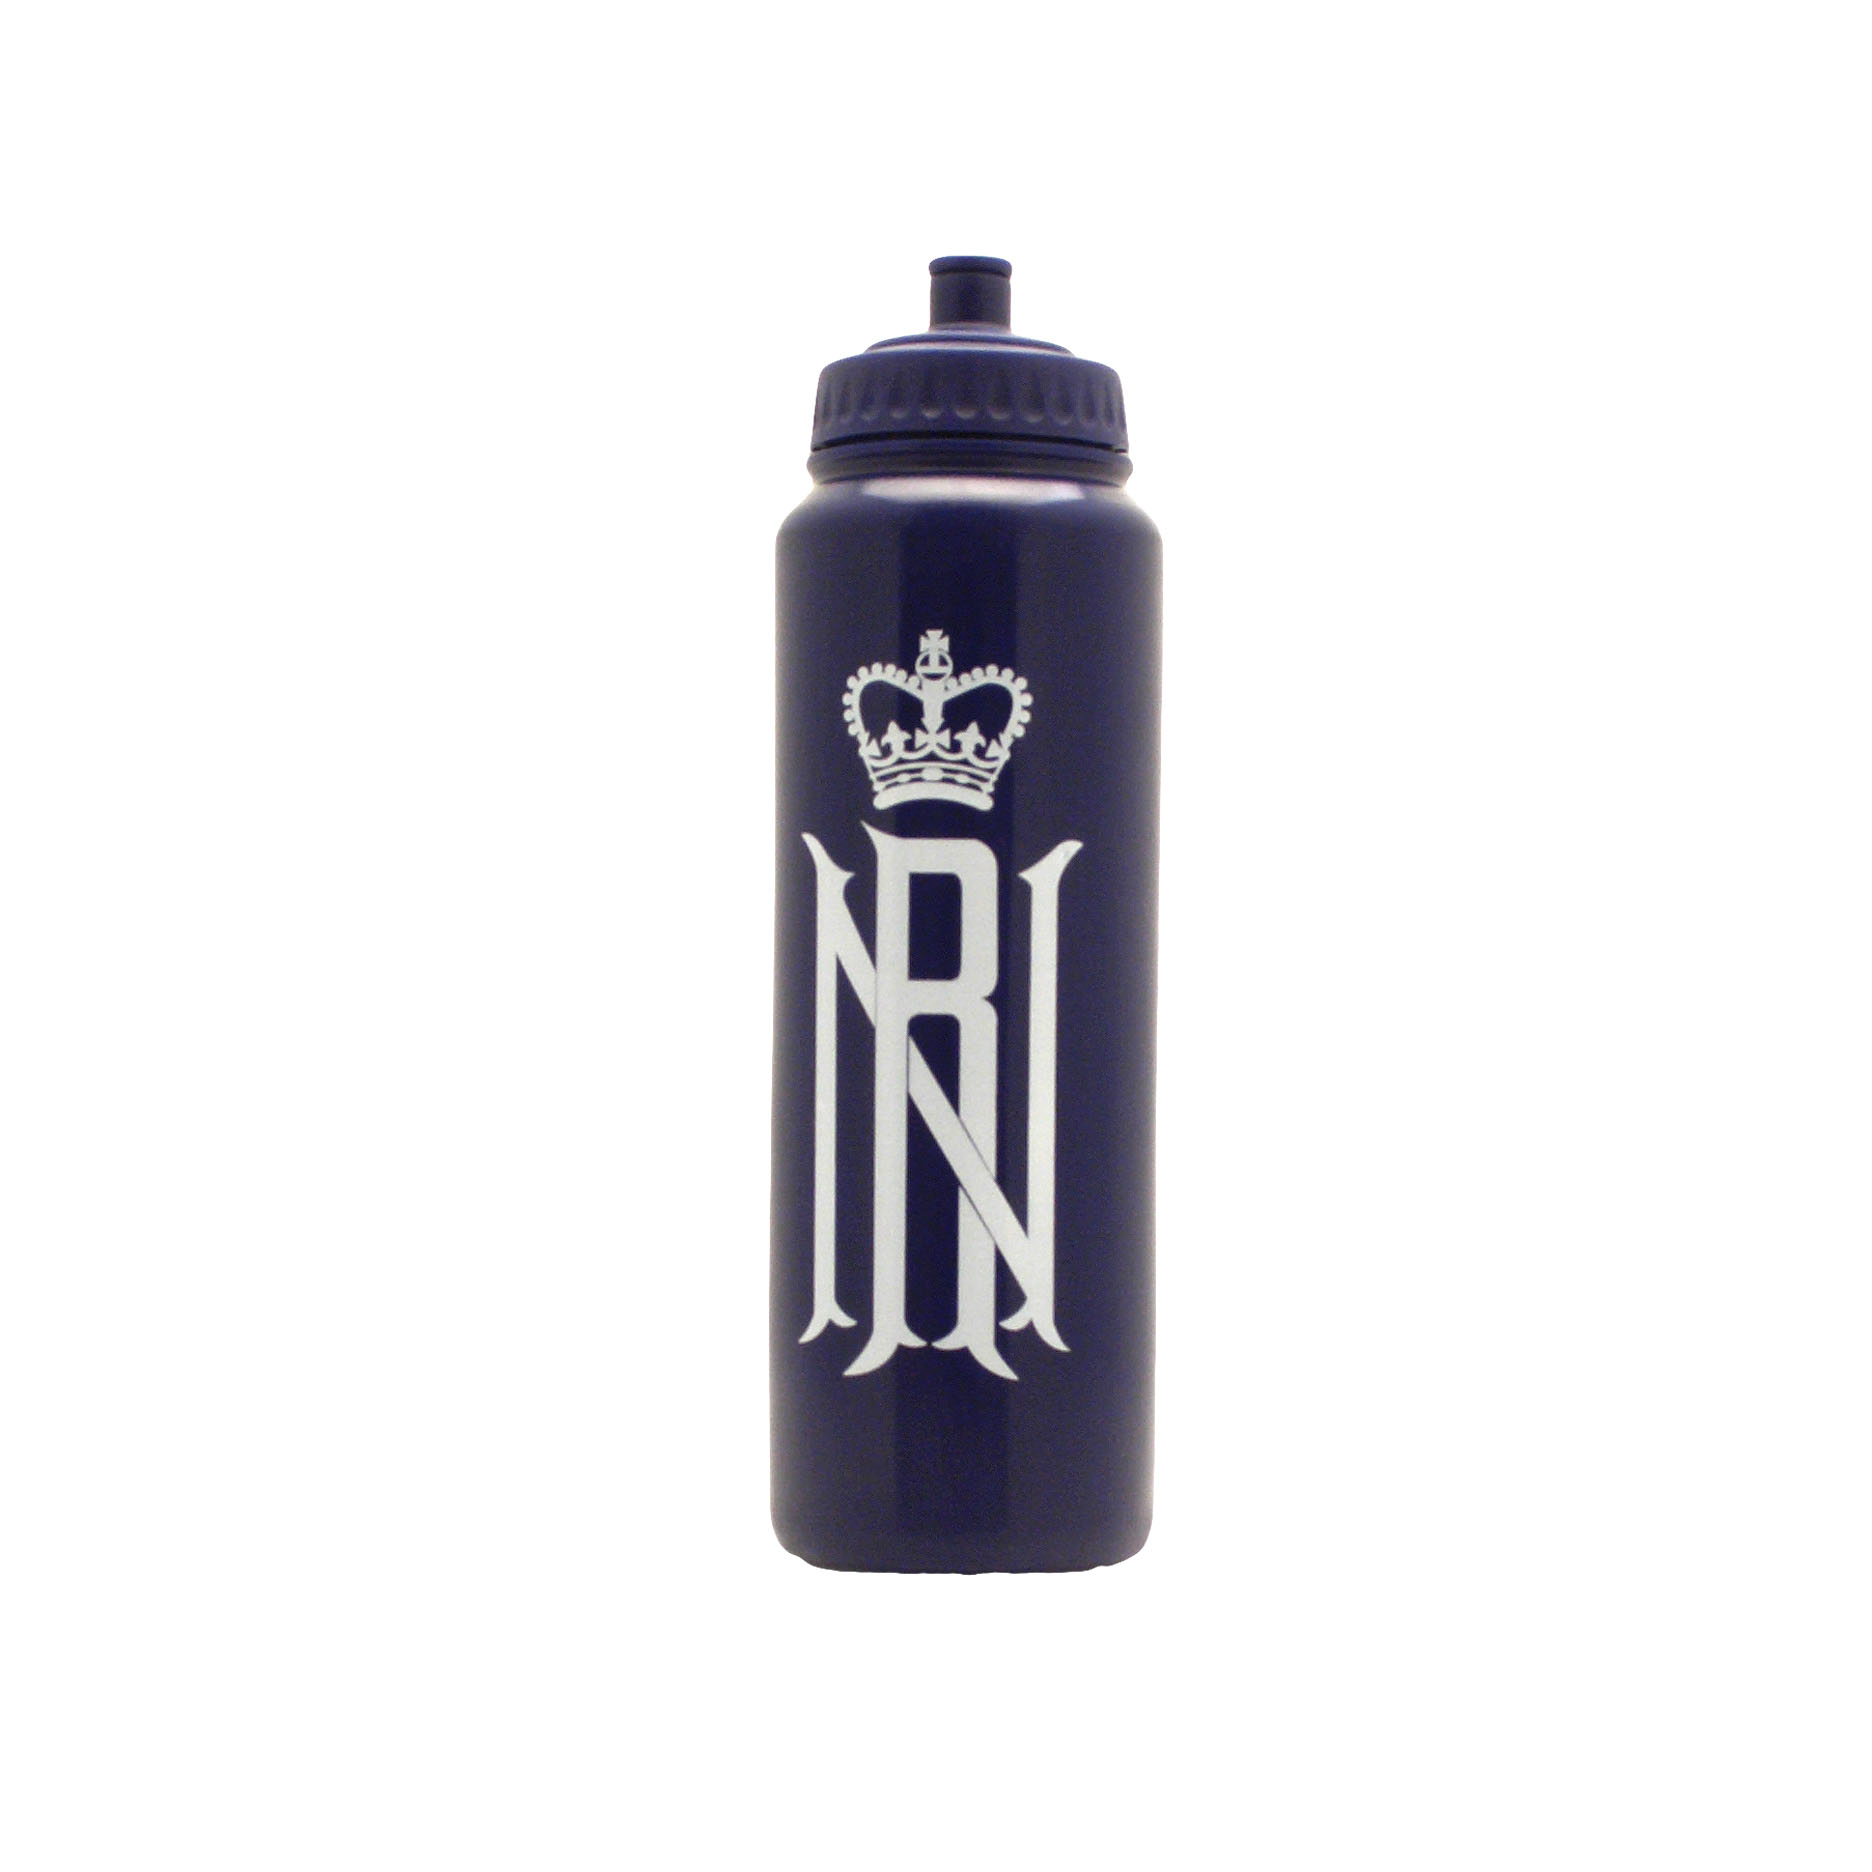 Black 1 litre sports bottle with matching push pull lid and personalised with a printed company logo